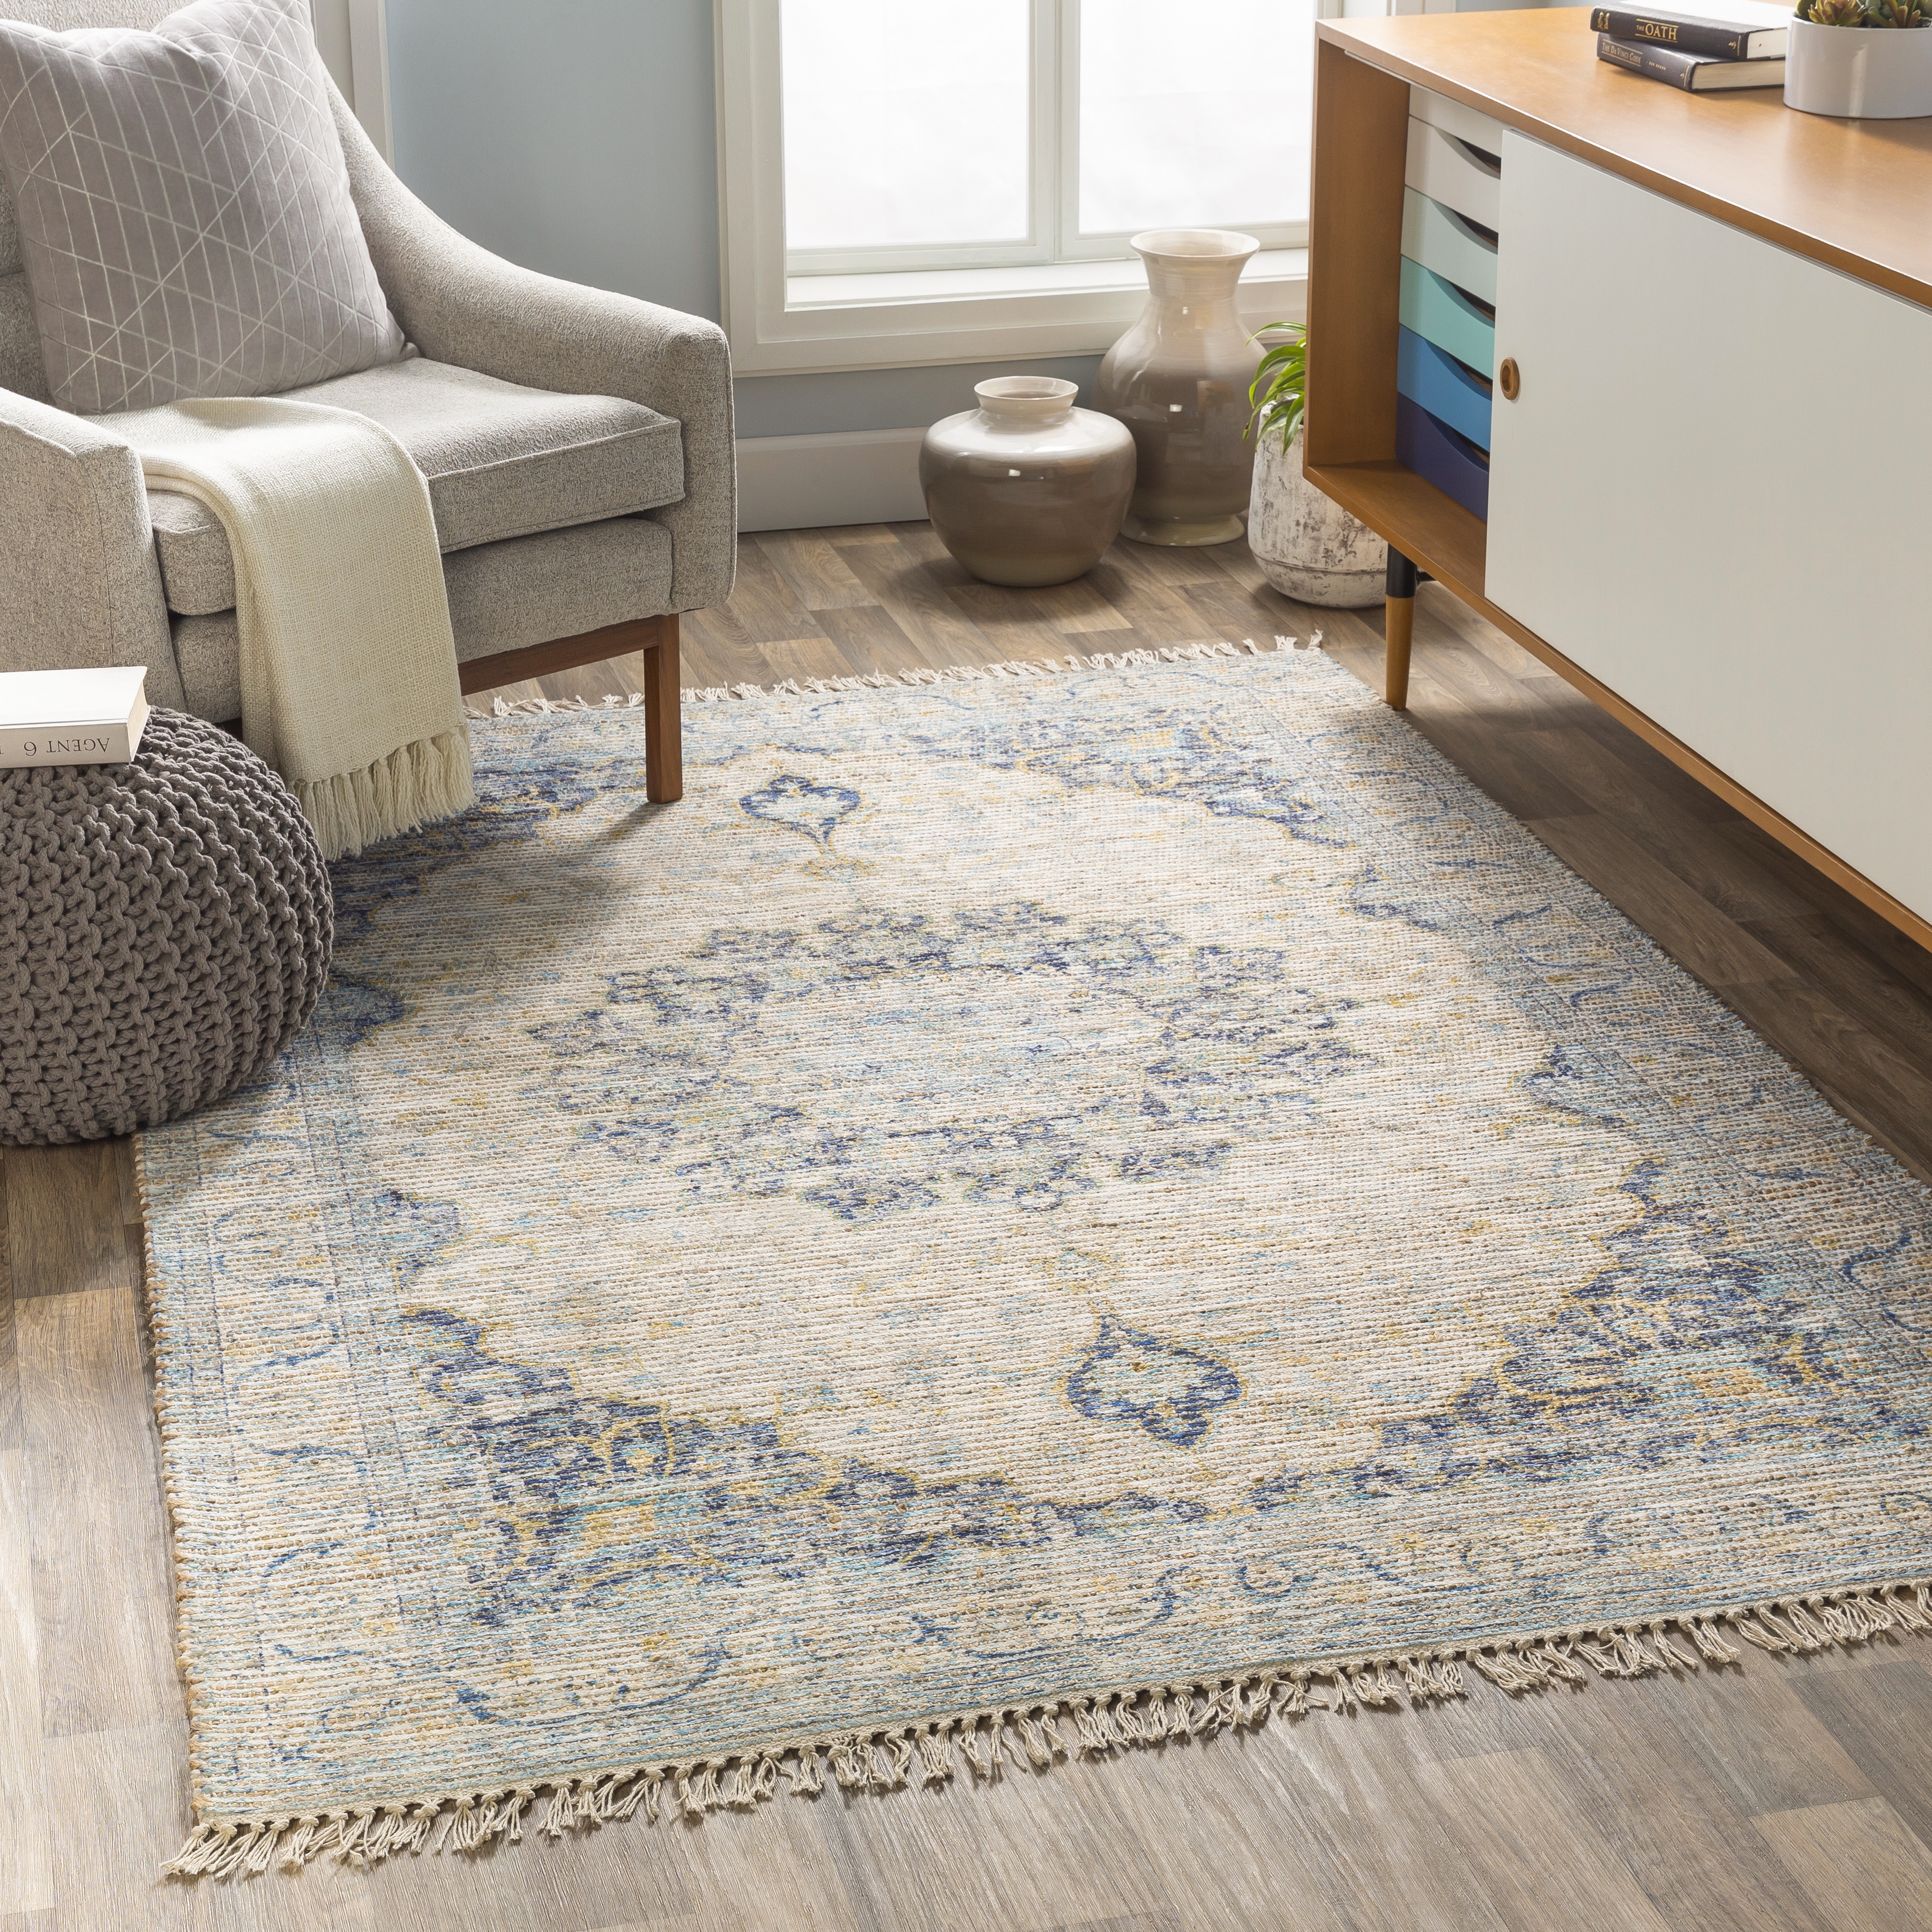 Coventry Rug, 2'6" x 8' - Image 1